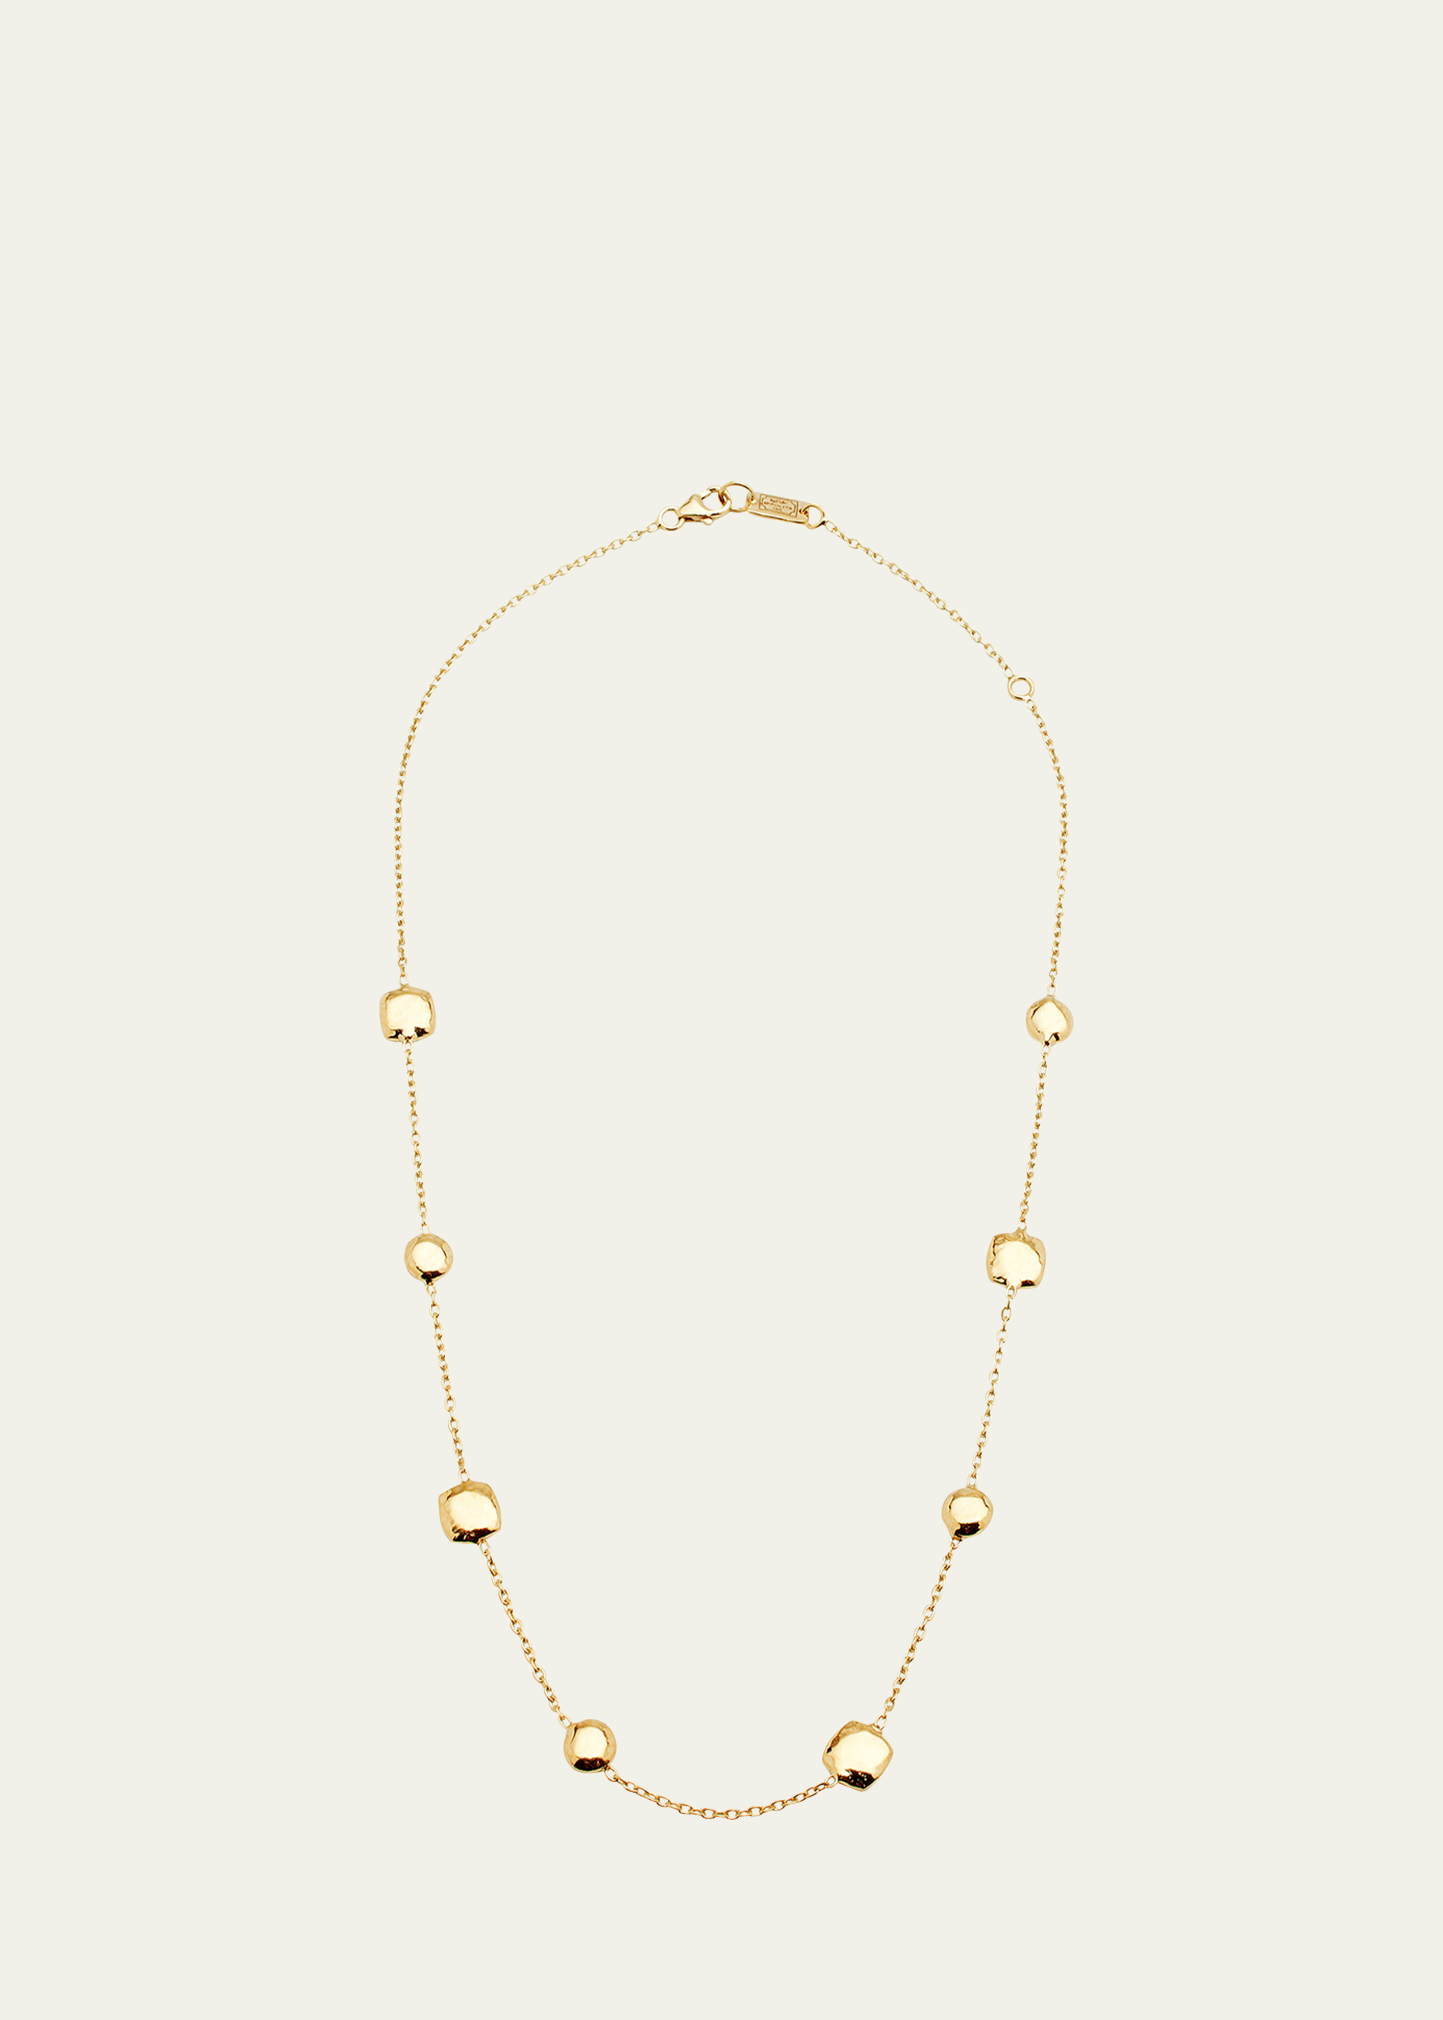 Ippolita Short Hammered Pinball Chain Necklace in 18K Gold